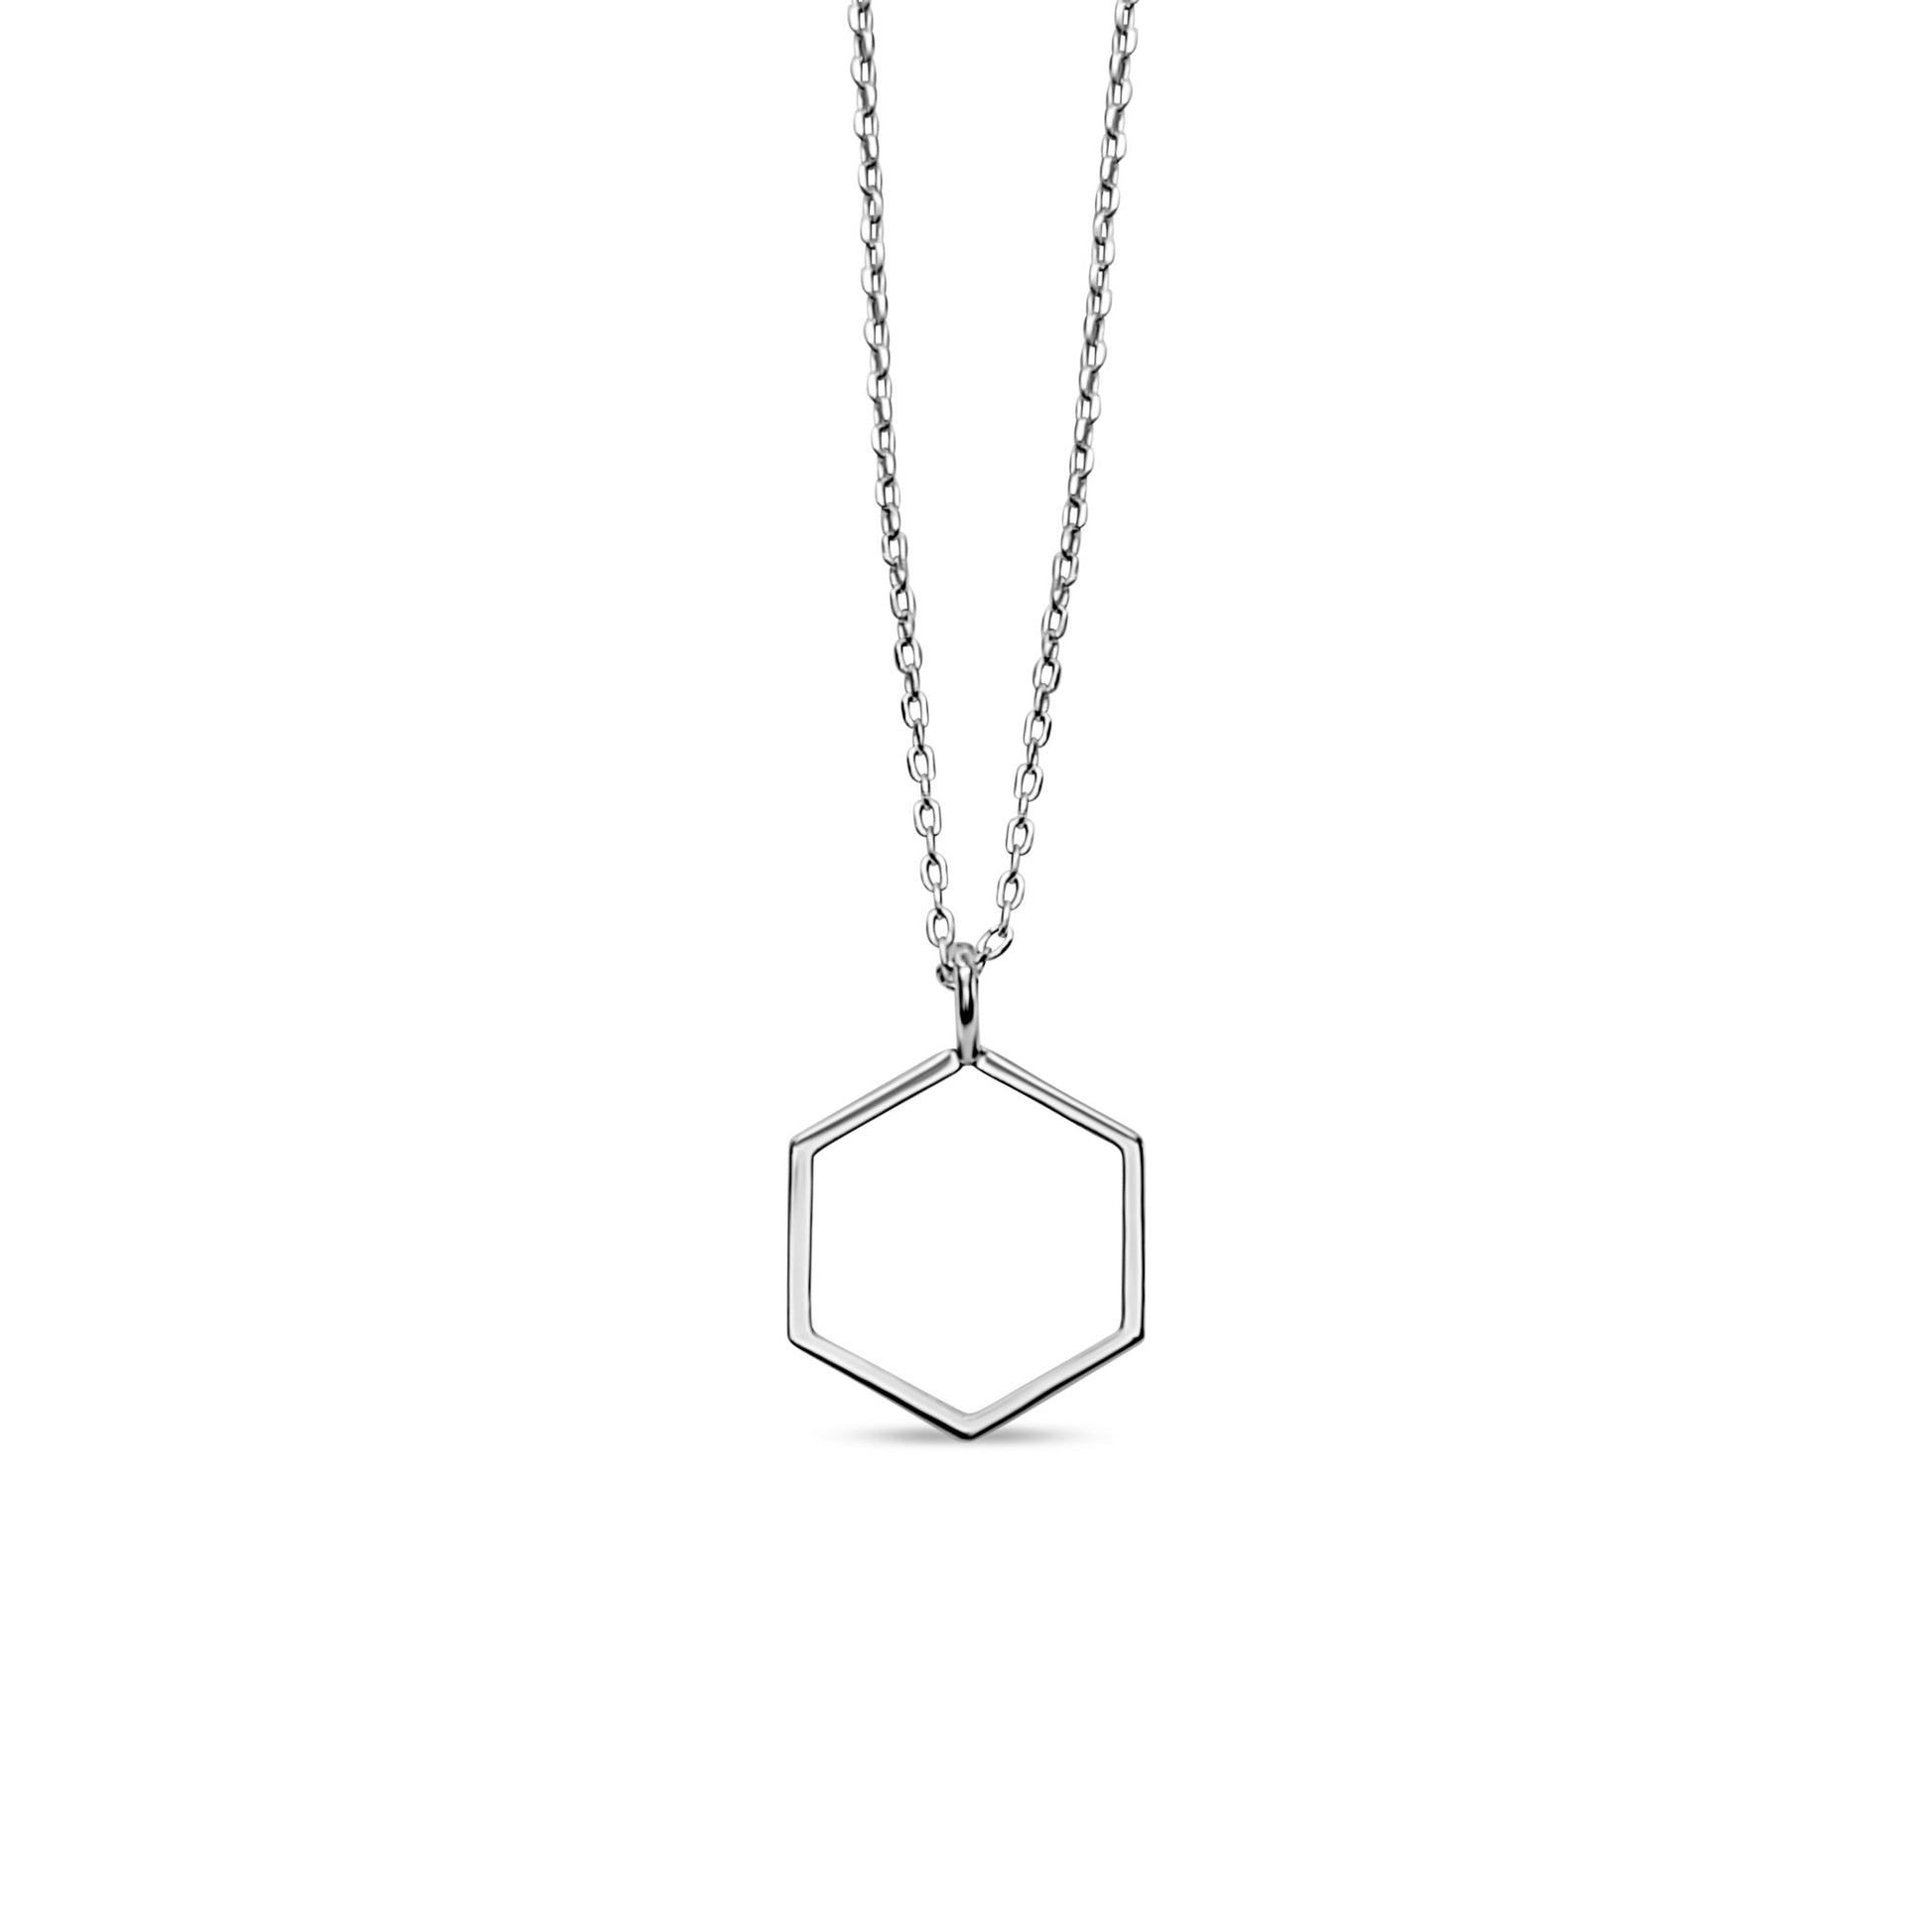 Melina hexagon minimalist pendant necklace in sterling silver